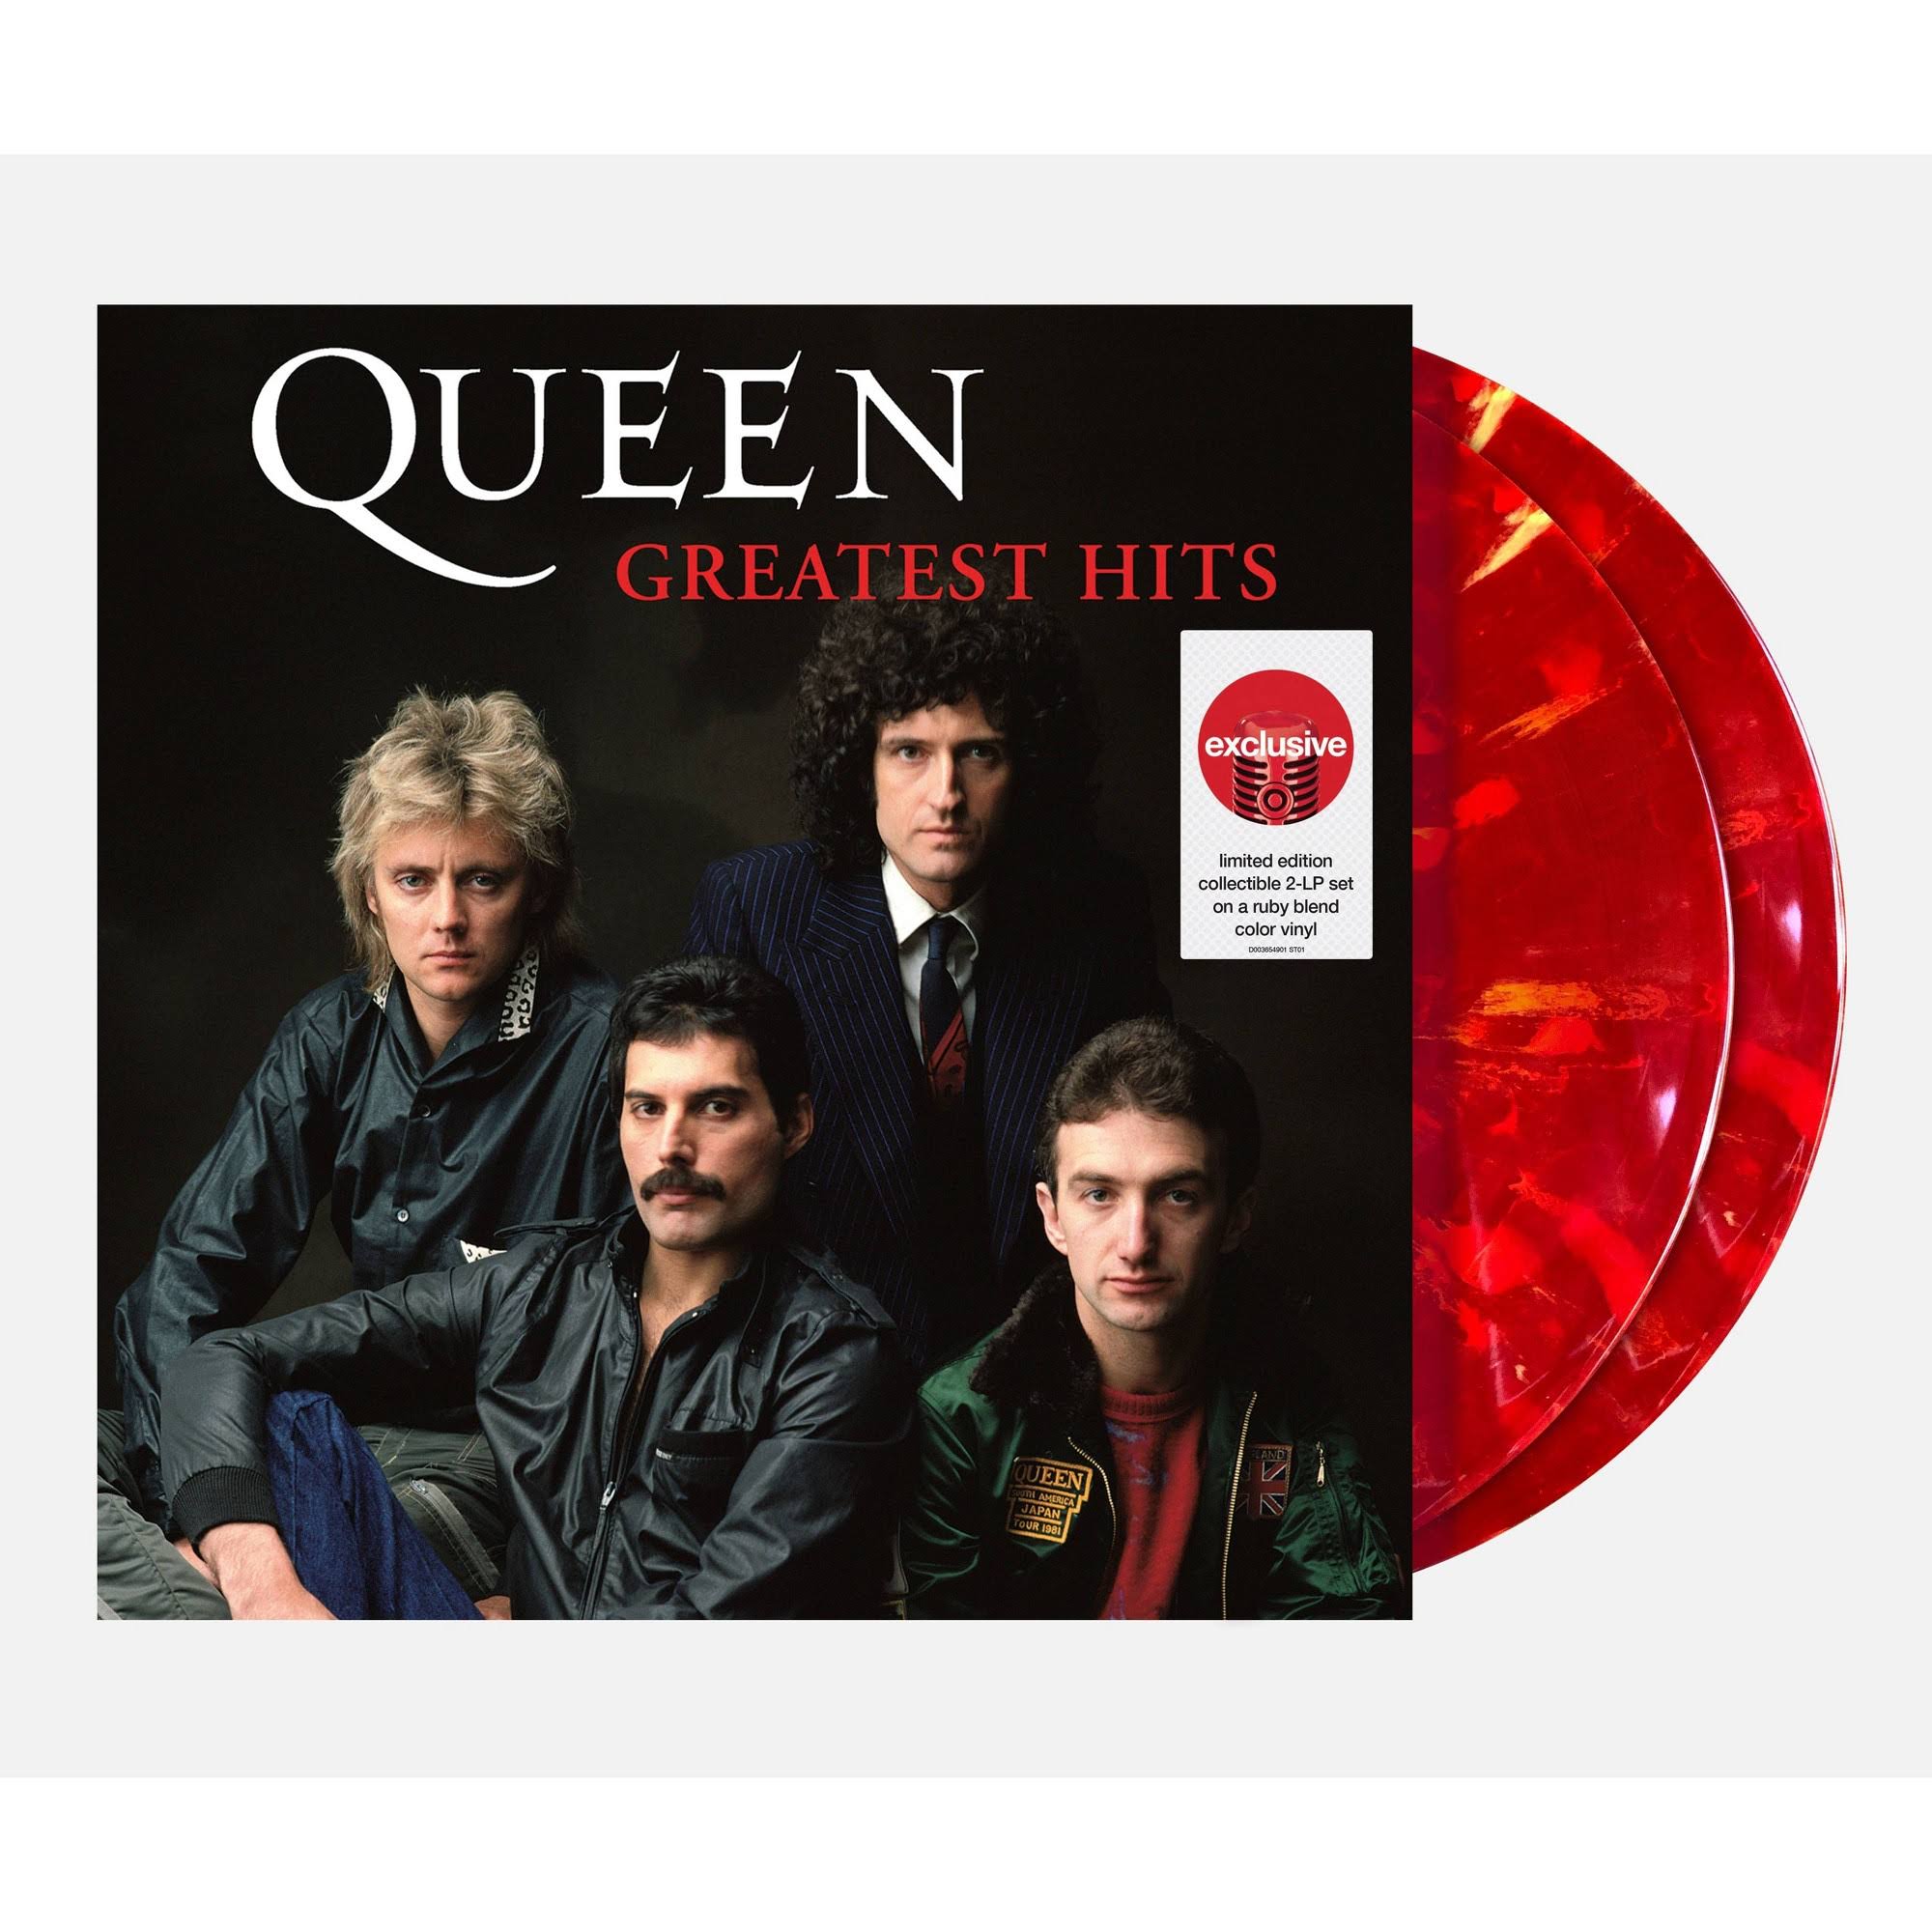 Queen Greatest Hits Limited Ruby Blend Vinyl 2 LP gatefold